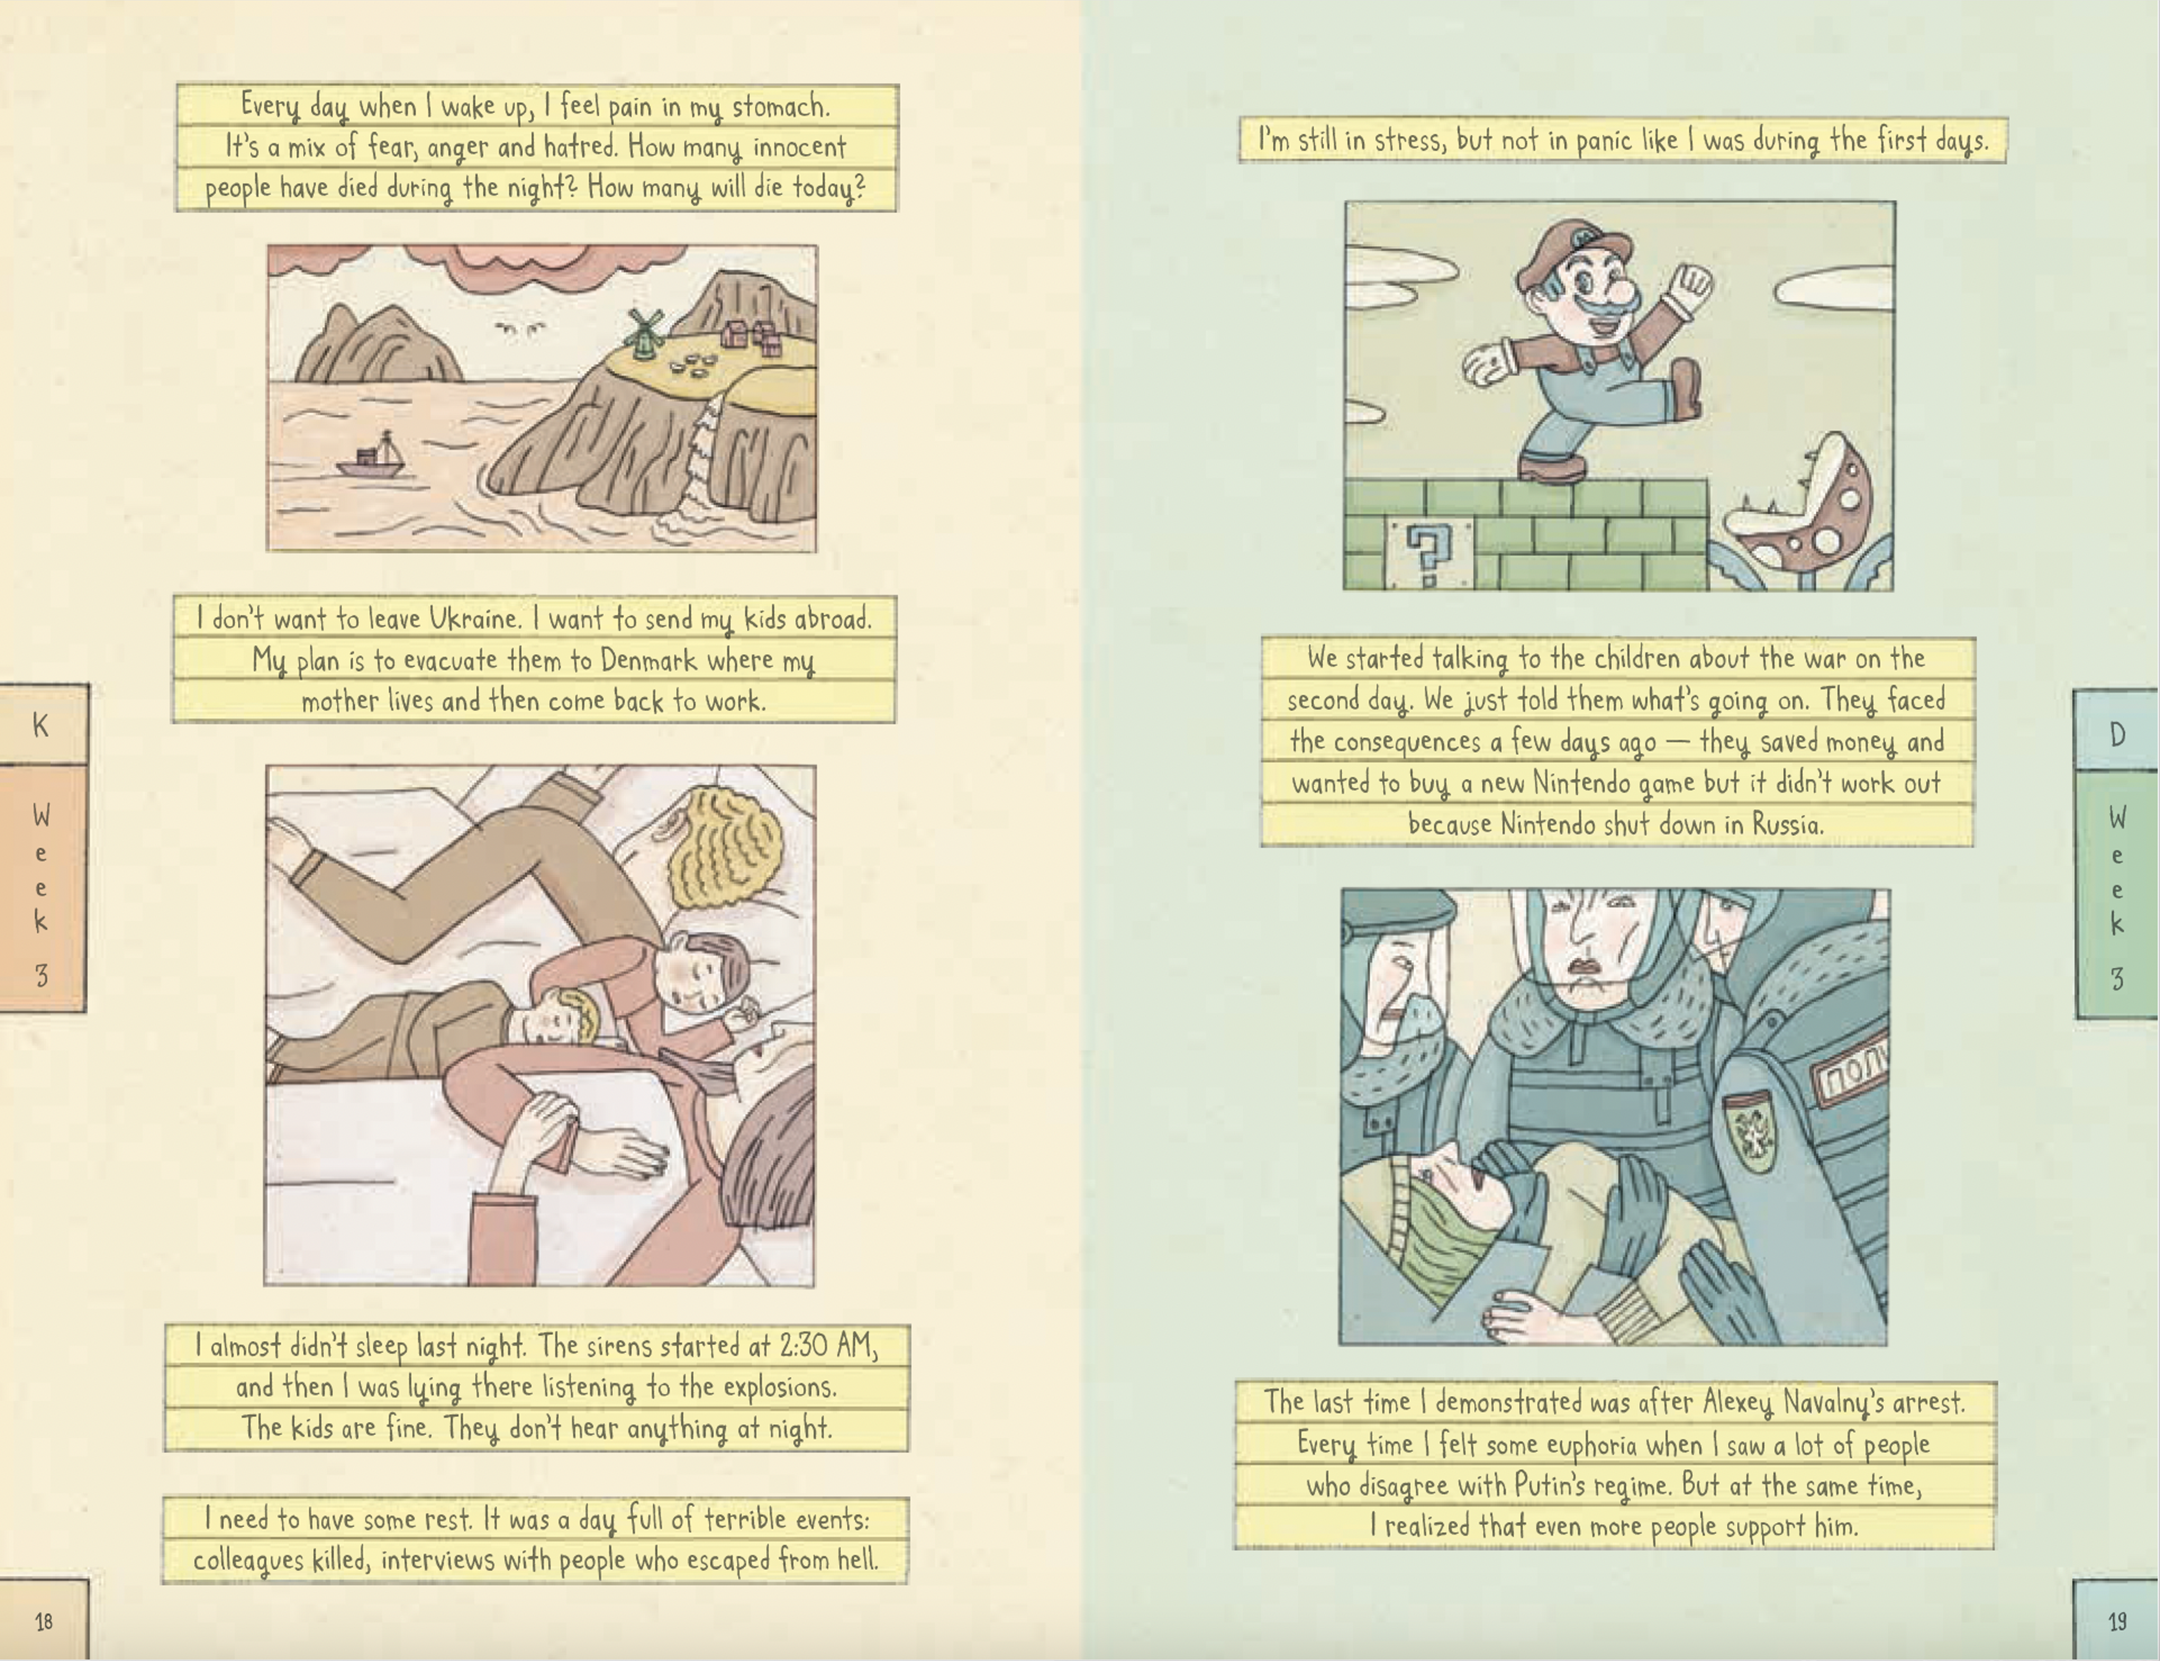 A page of cartoon pictures with text.